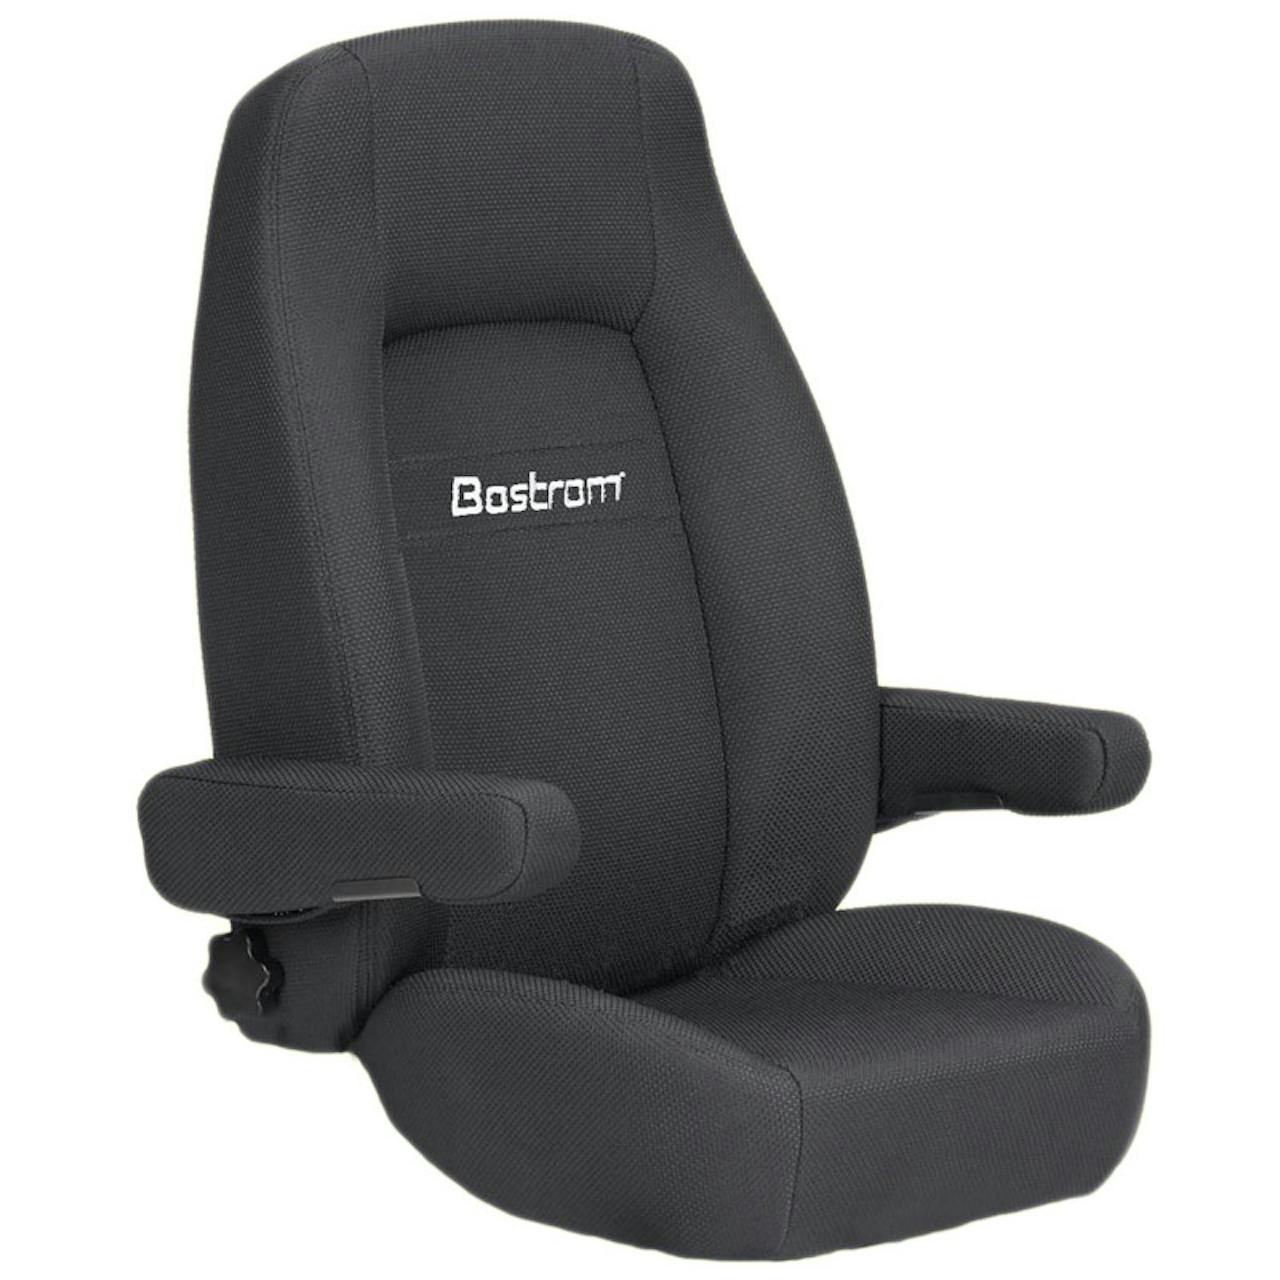 Bostrom Liberty series Replacement Seat Cushion Foam (FOAM ONLY)